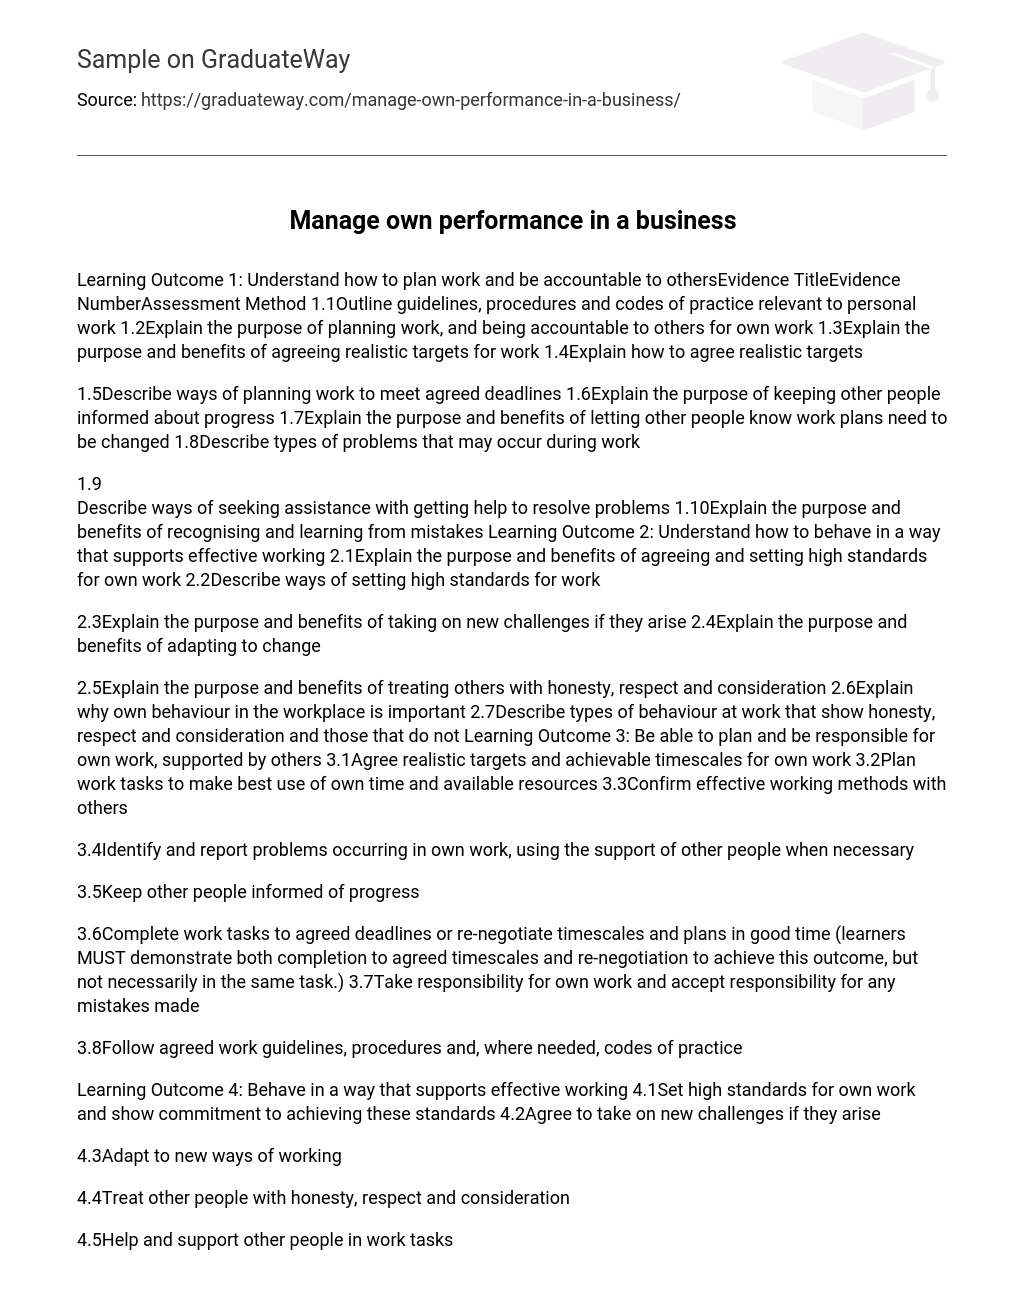 Manage own performance in a business